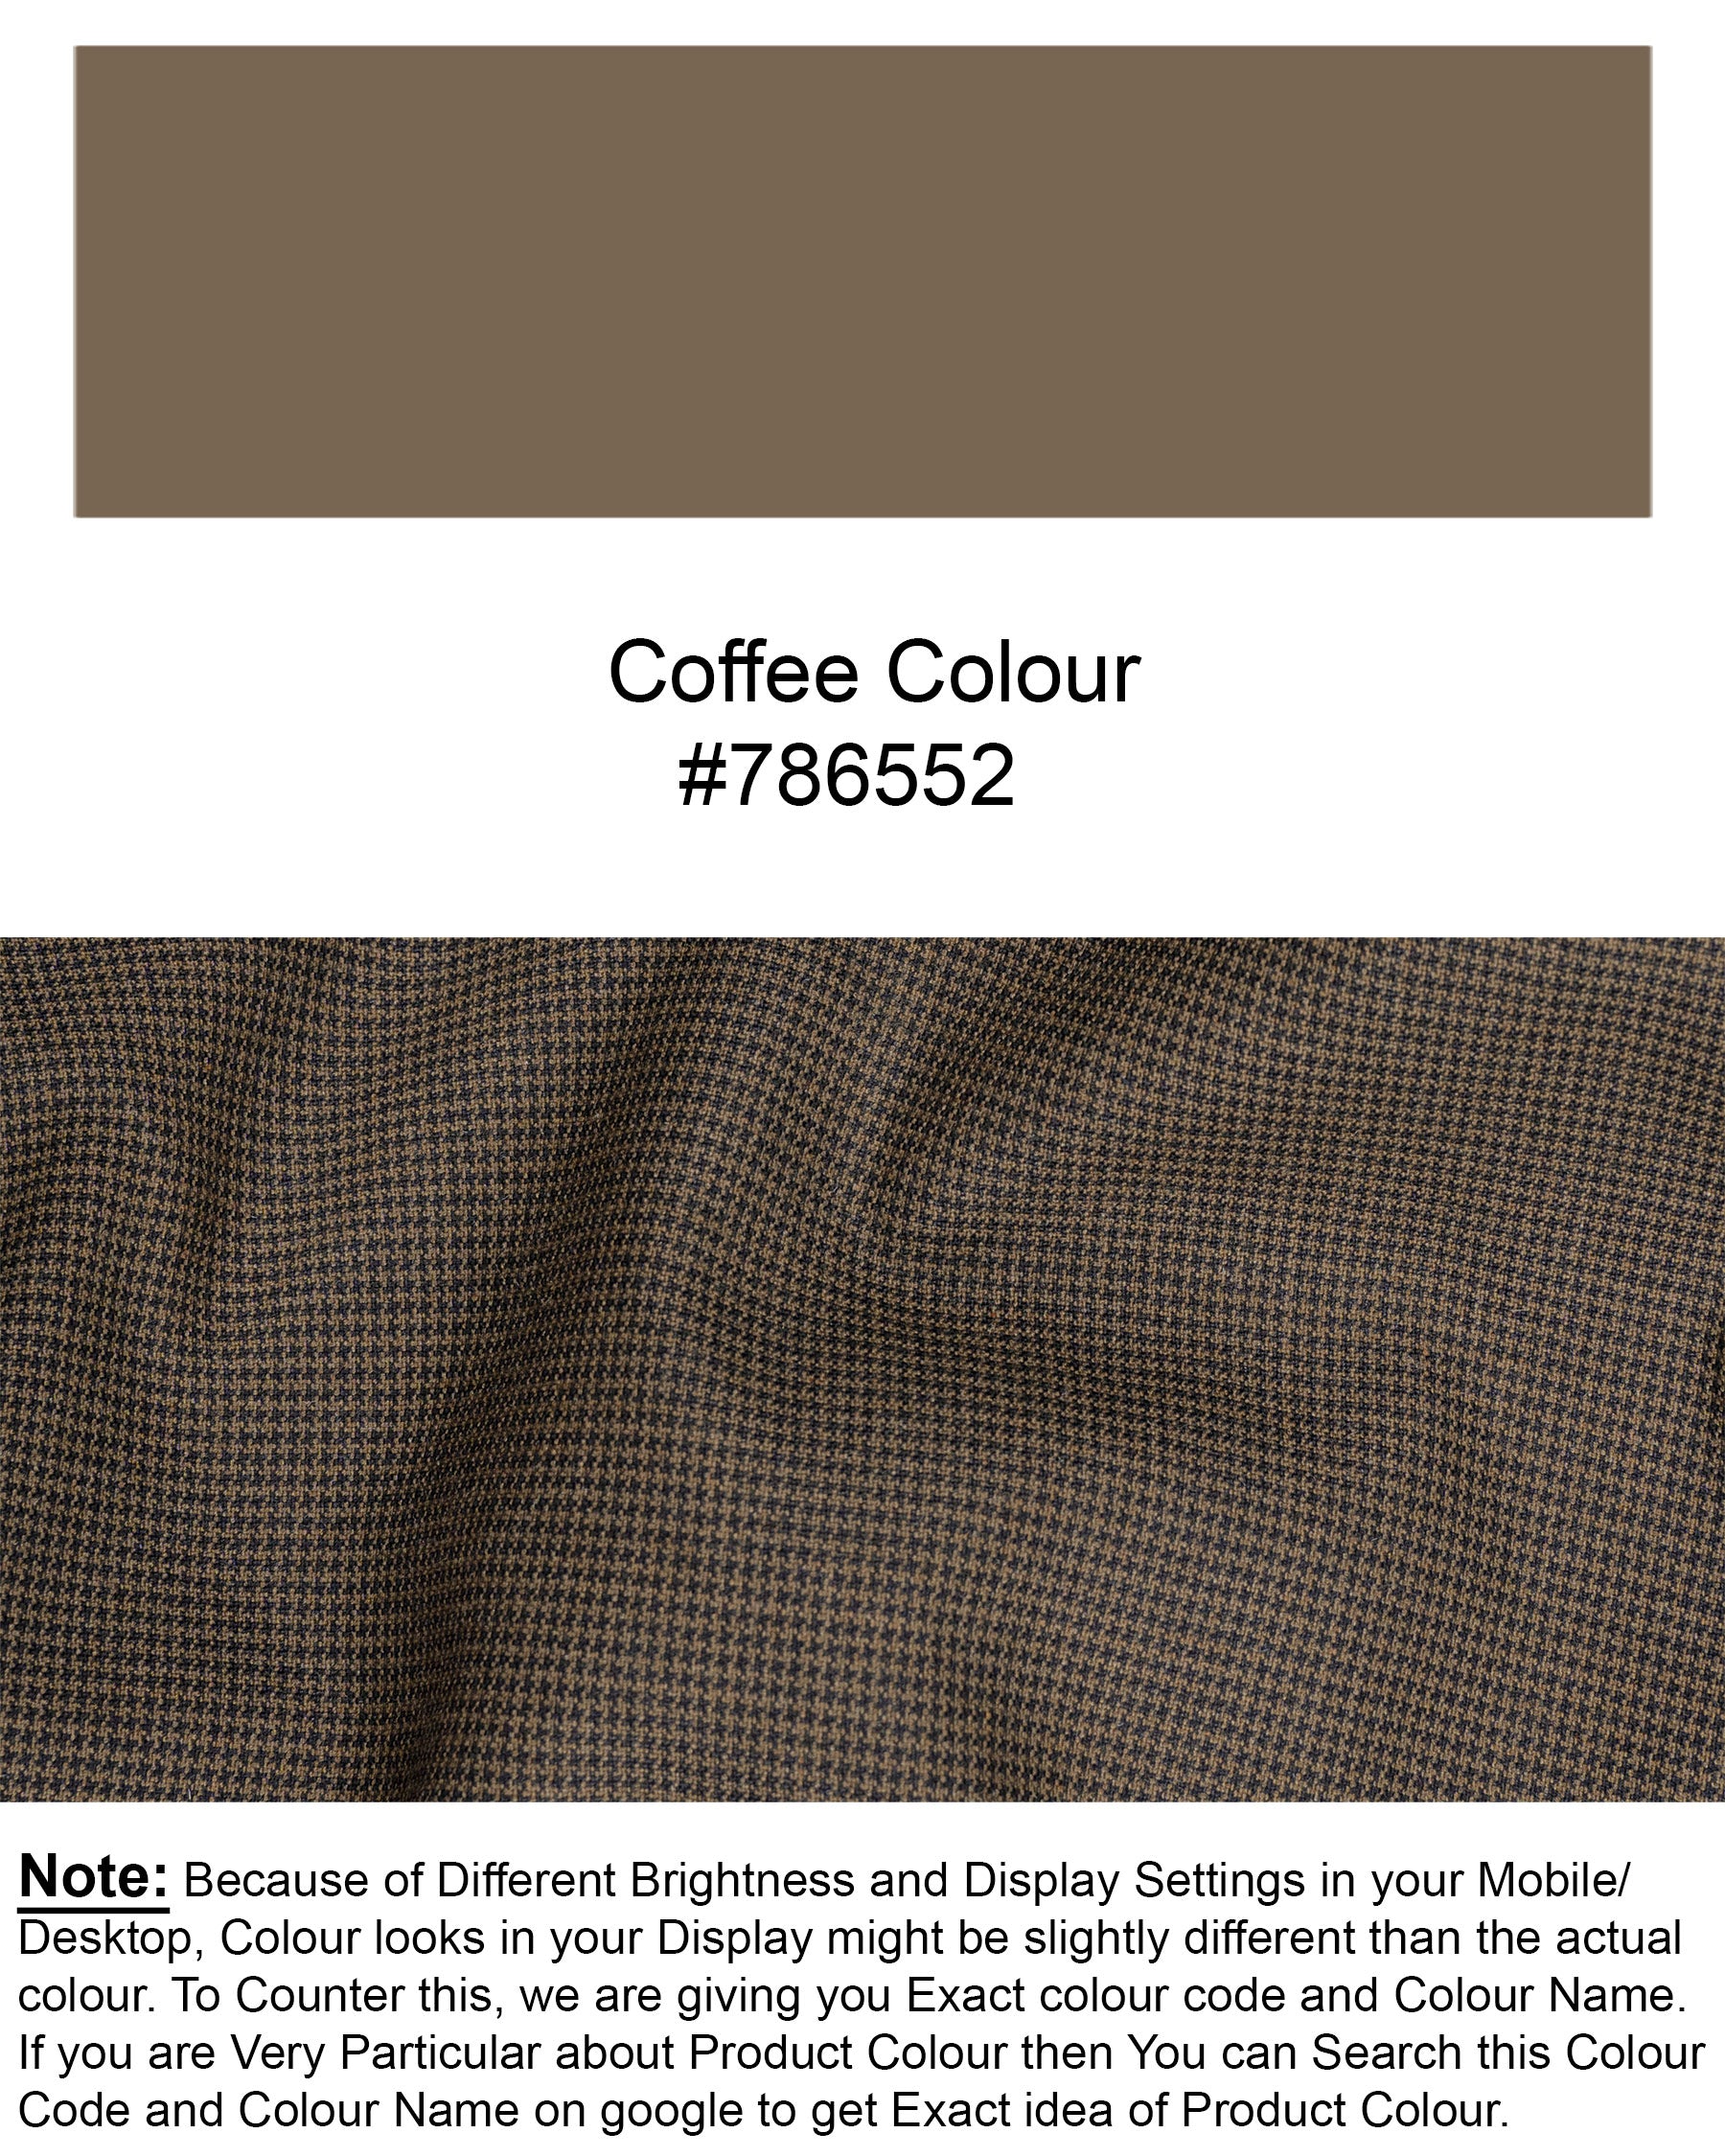 Coffee Brown Hounstooth Wool Rich Sports Blazer BL1600-SB-PP-36, BL1600-SB-PP-38, BL1600-SB-PP-40, BL1600-SB-PP-42, BL1600-SB-PP-44, BL1600-SB-PP-46, BL1600-SB-PP-48, BL1600-SB-PP-50, BL1600-SB-PP-52, BL1600-SB-PP-54, BL1600-SB-PP-56, BL1600-SB-PP-58, BL1600-SB-PP-60